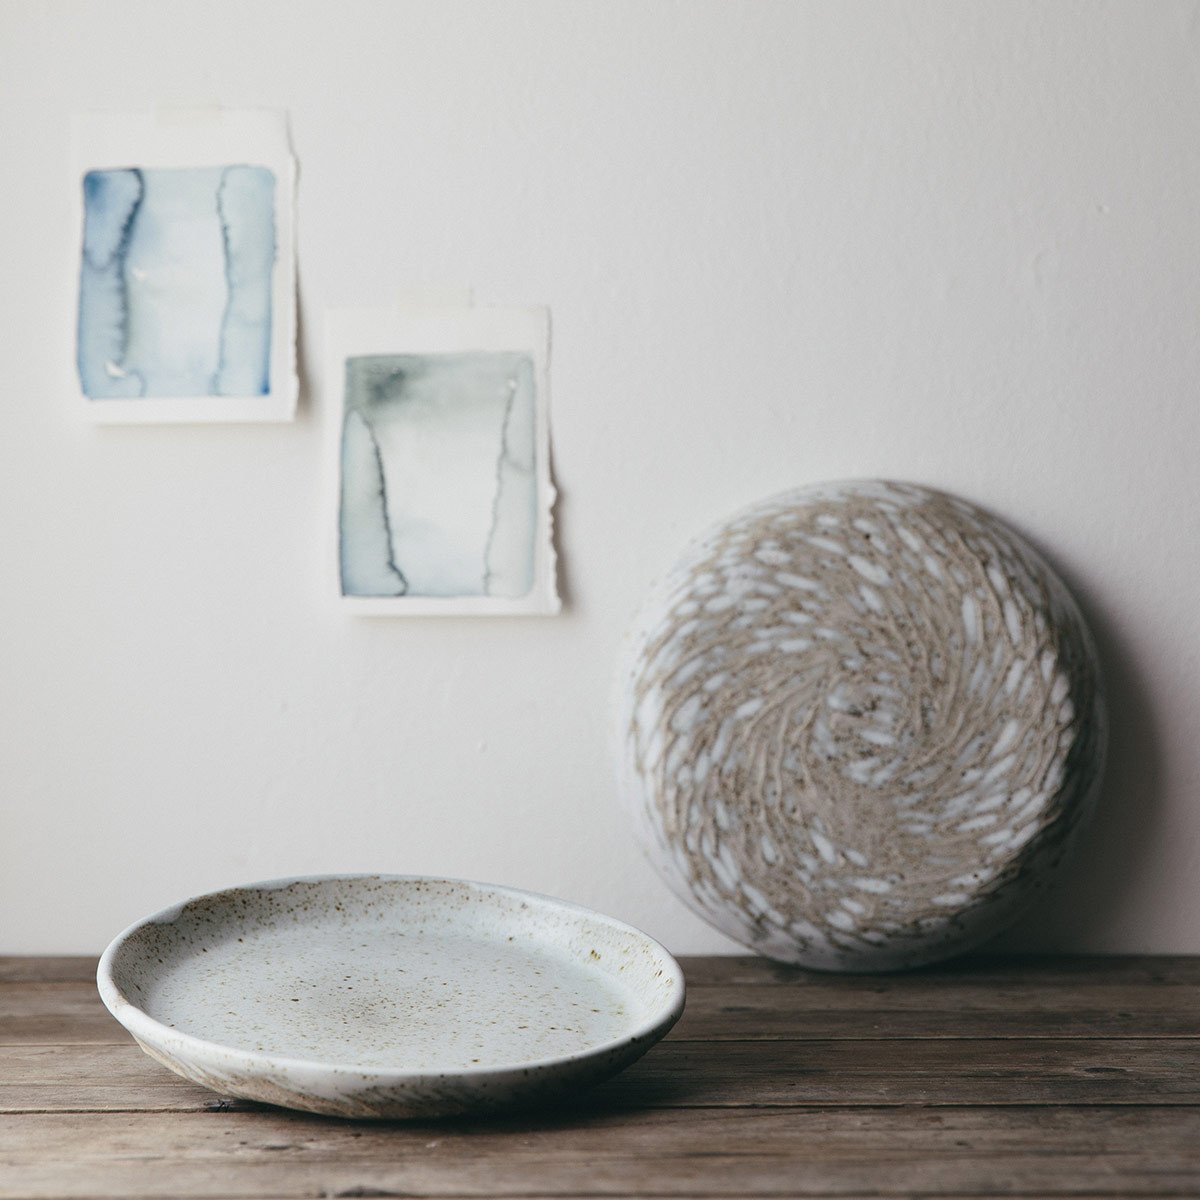 Beguiling Wild Ceramic Plate